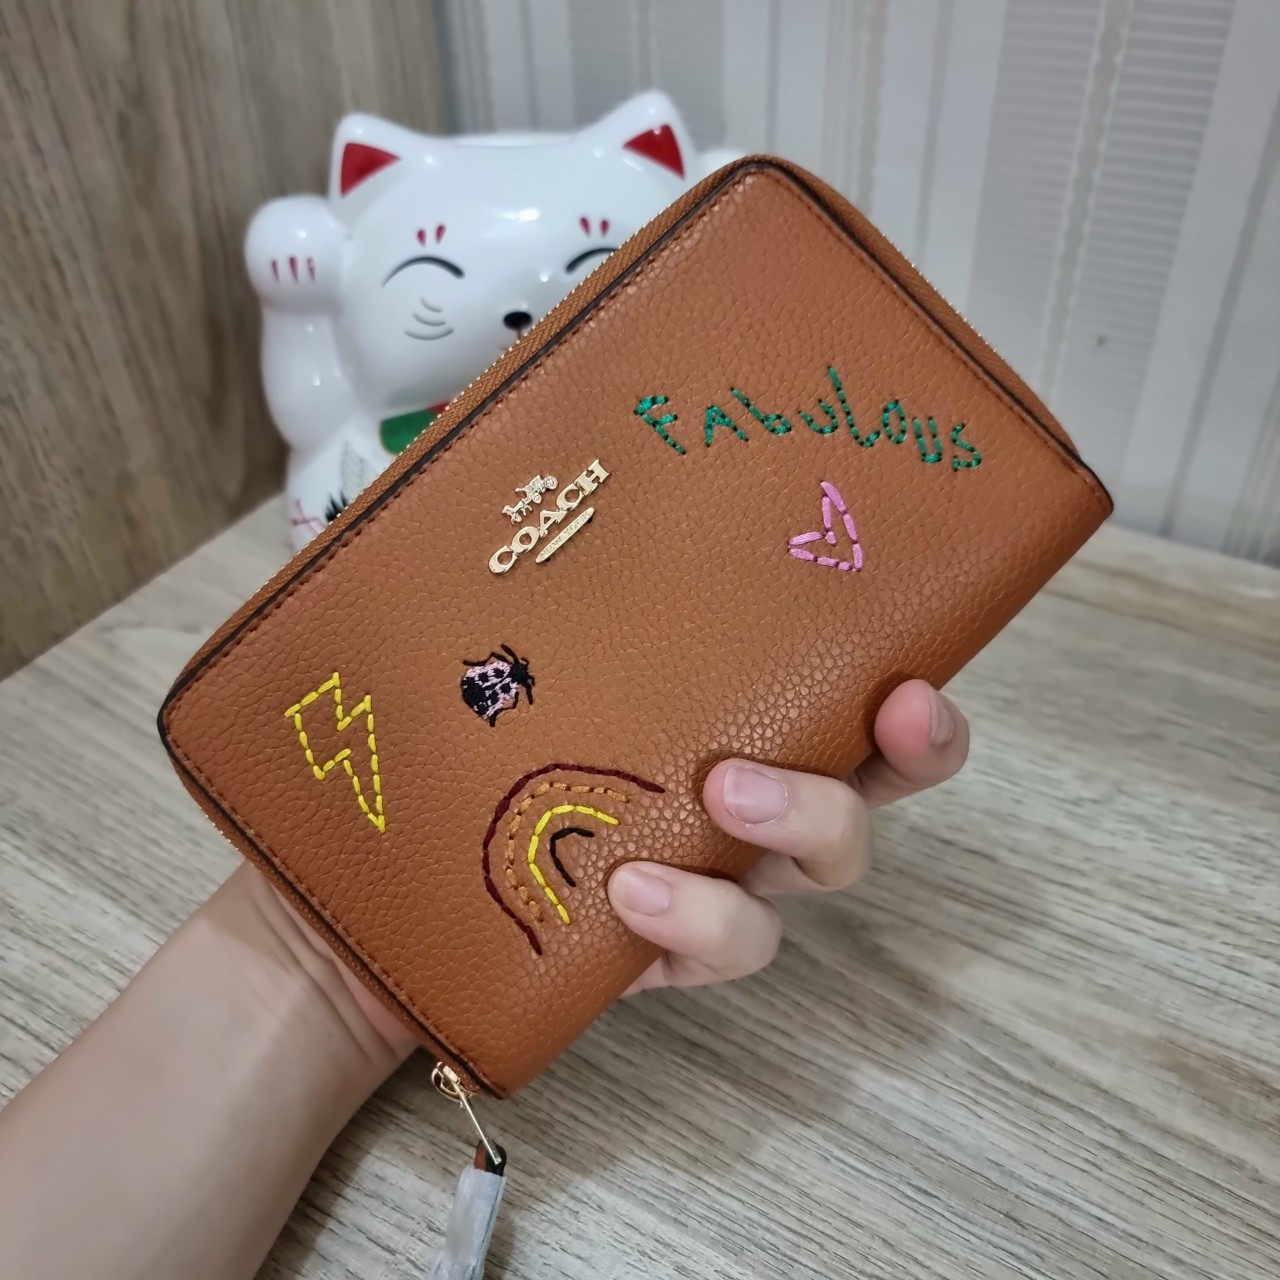 VÍ DÀI NỮ BROWN COACH MEDIUM ID ZIP WALLET WITH DIARY EMBROIDERY 1